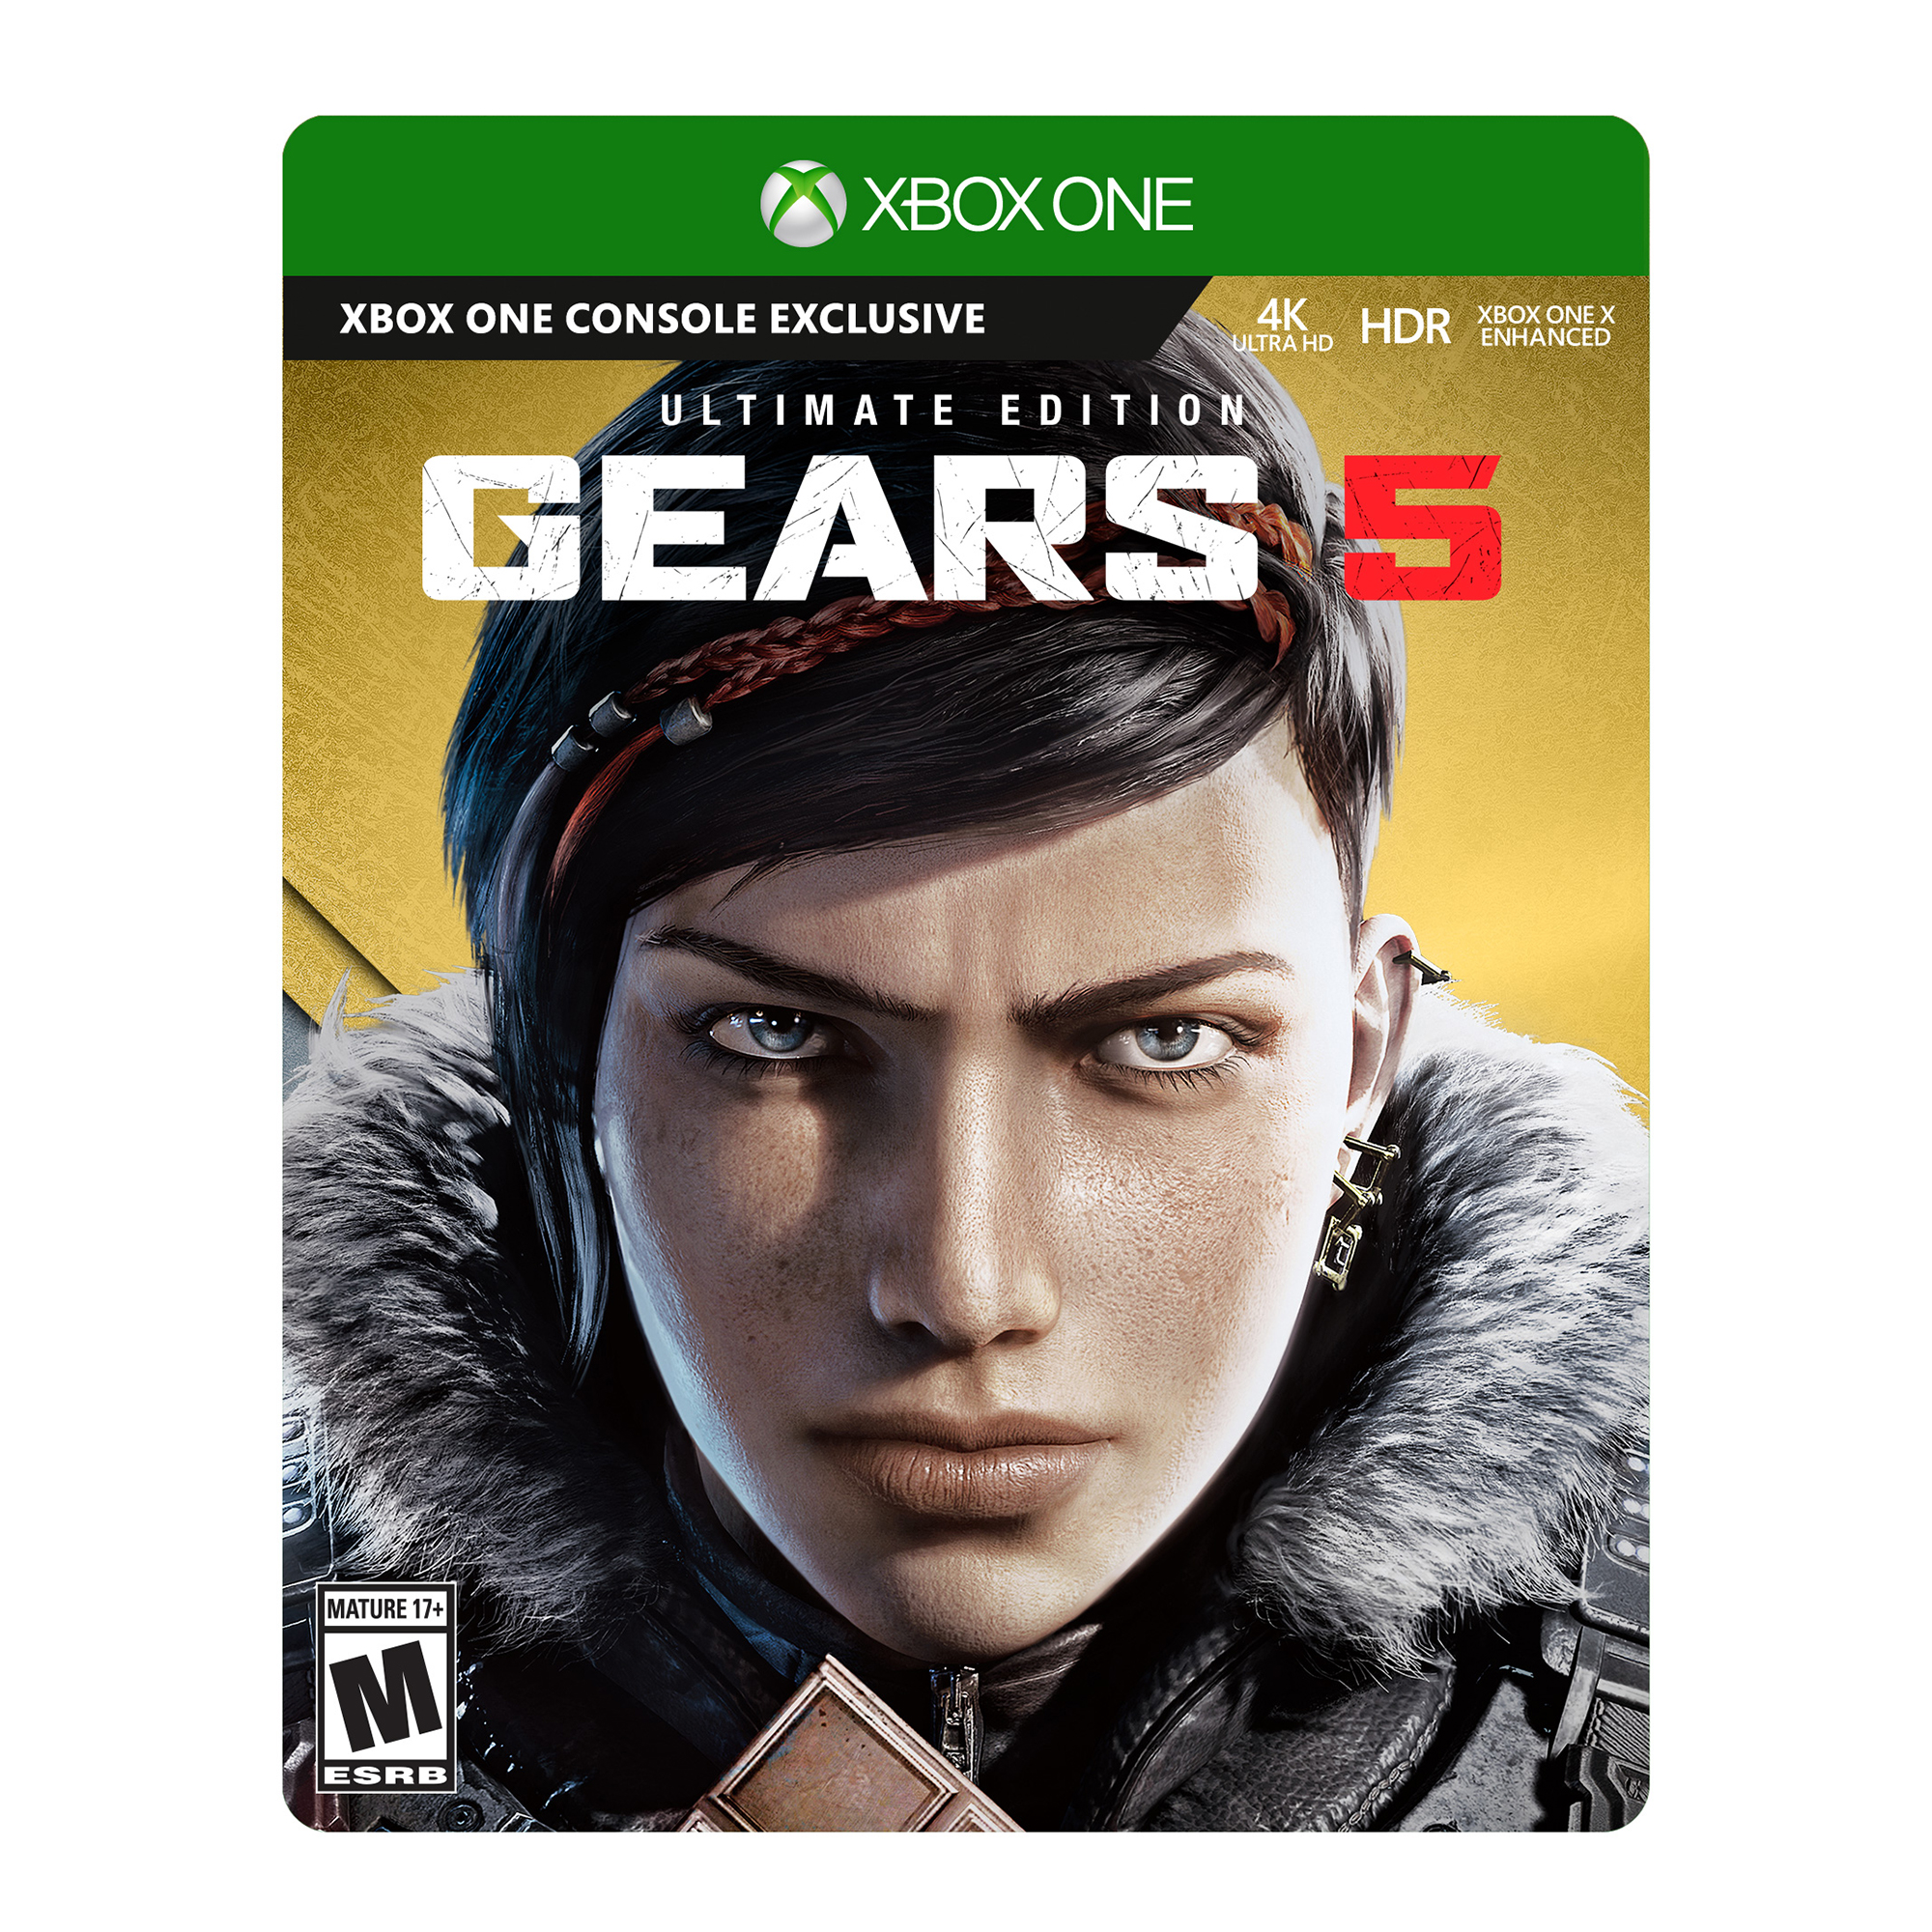 Gears 5 Ultimate Edition - Xbox One was $79.99 now $34.99 (56.0% off)